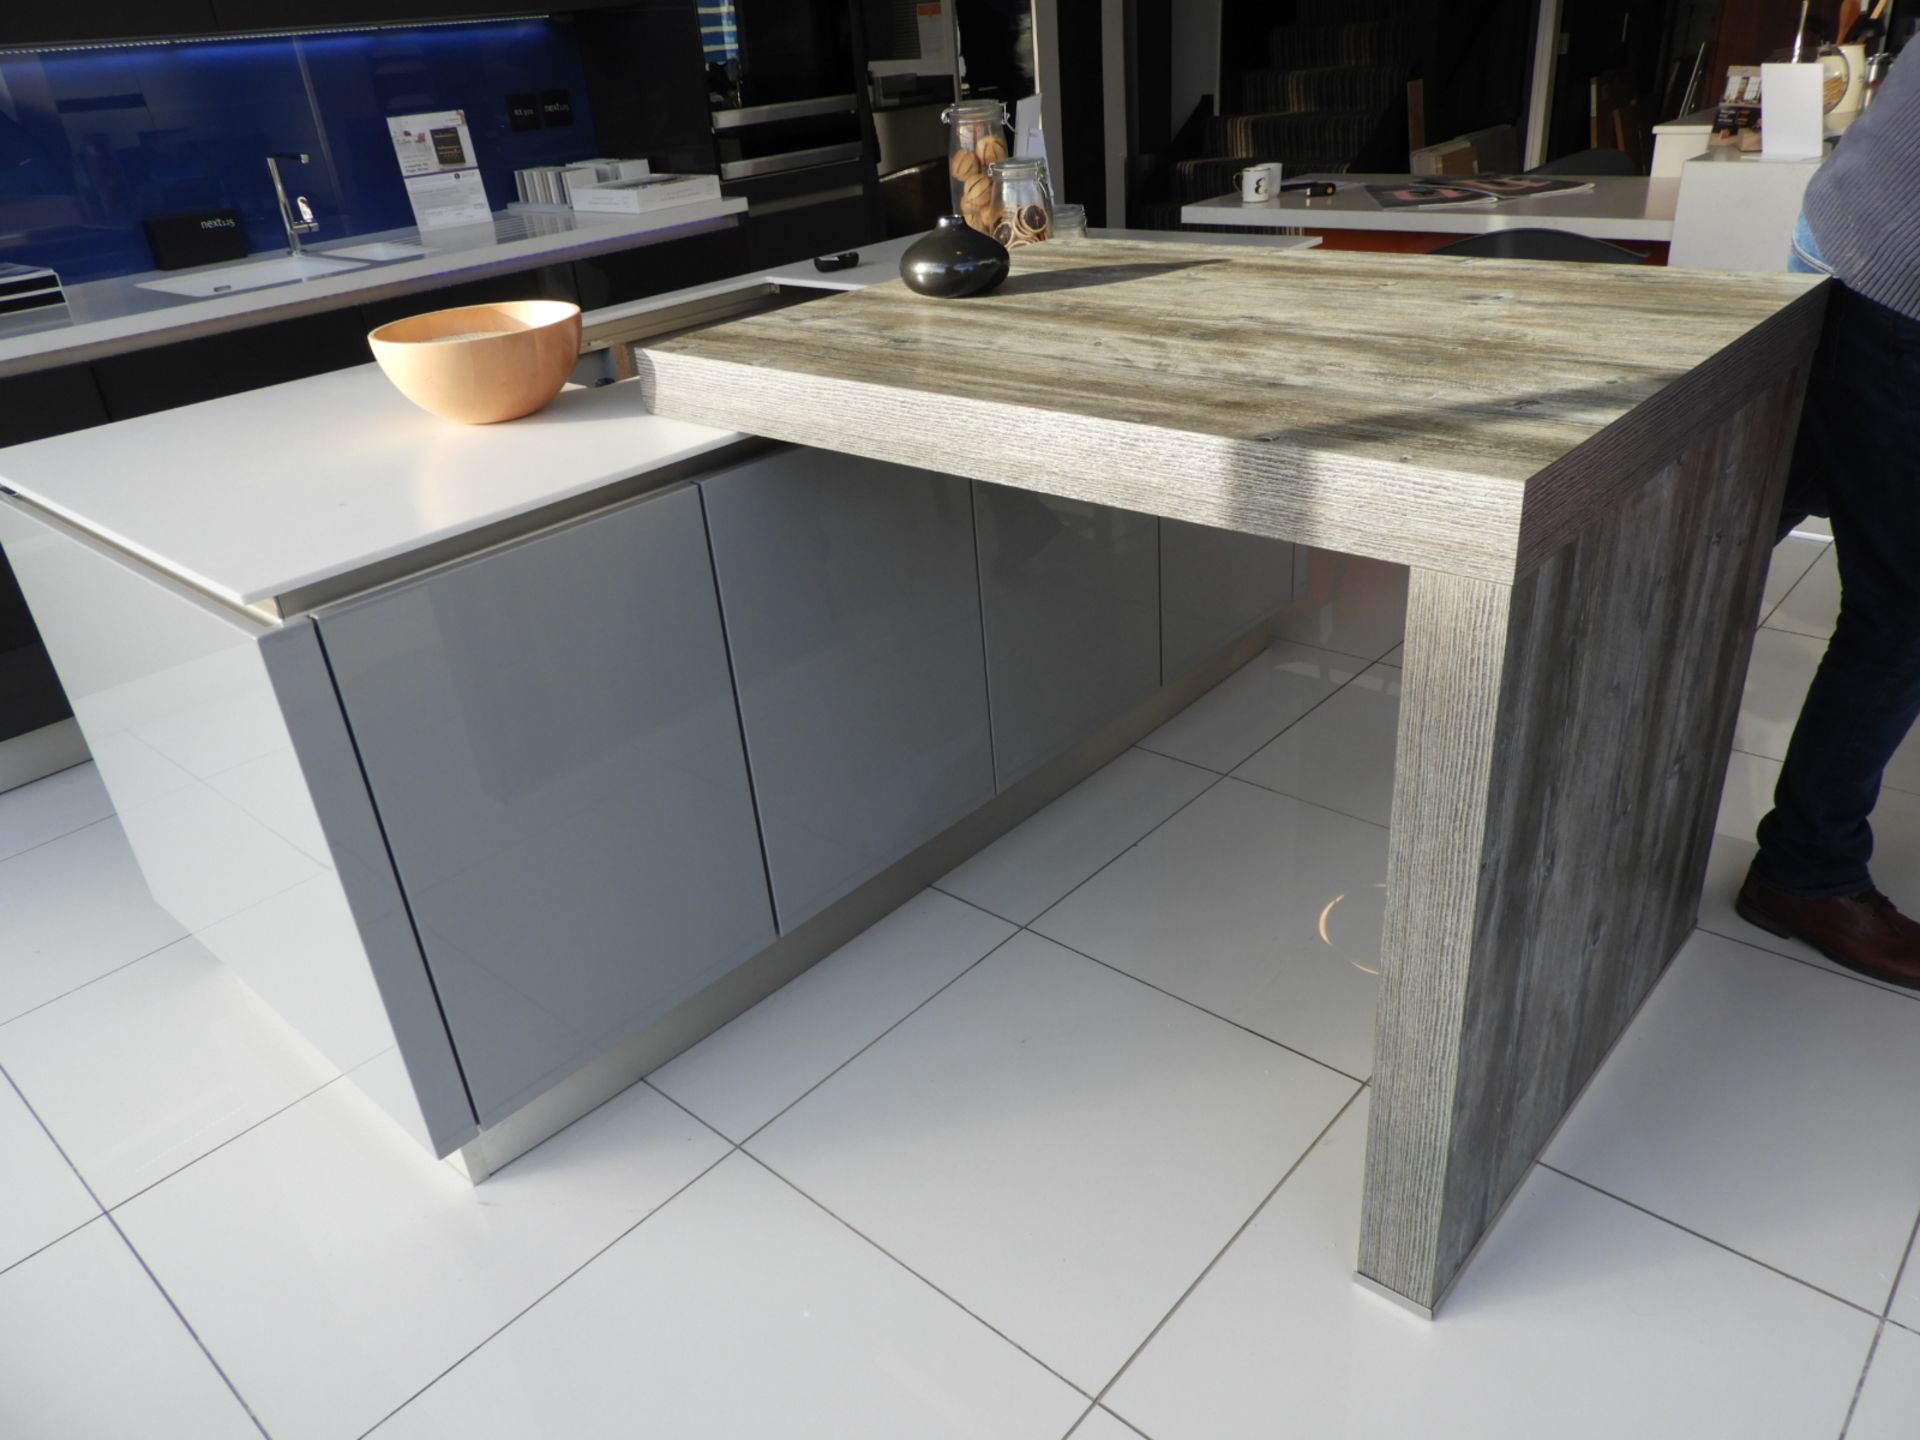 *High Gloss T-Shaped Island Unit with Fitted Drawers and Woodgrain Breakfast Bar - Image 2 of 2